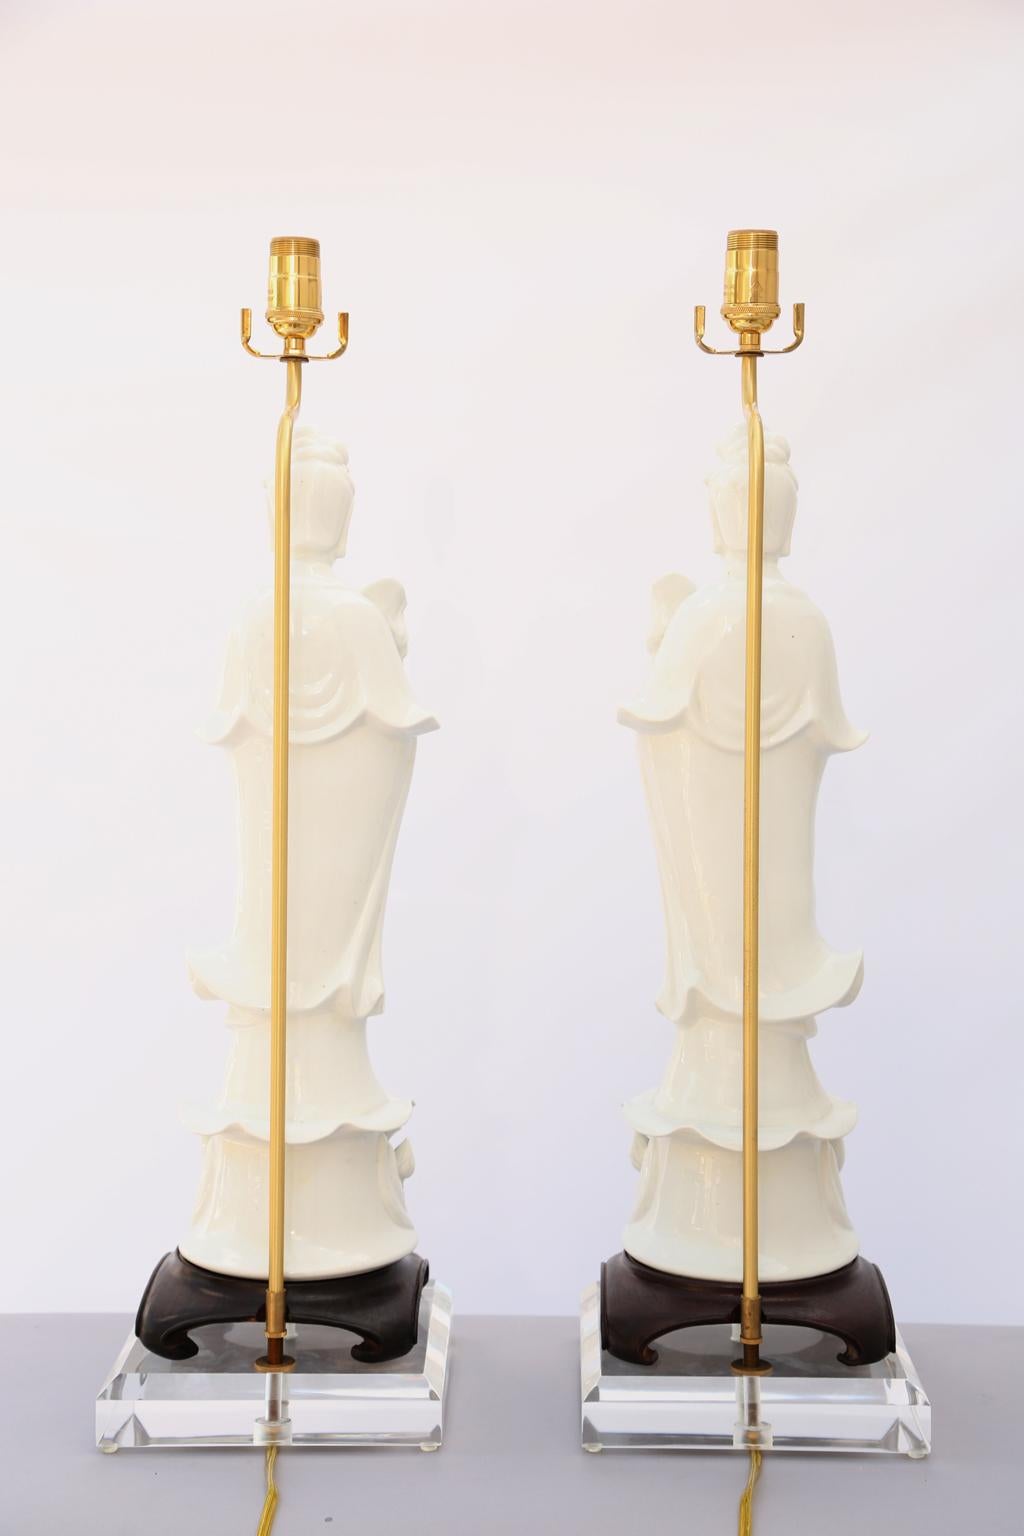 Porcelain Monumental Pair of Blanc de Chine Kwan Yin Figural Lamps on Lucite Bases